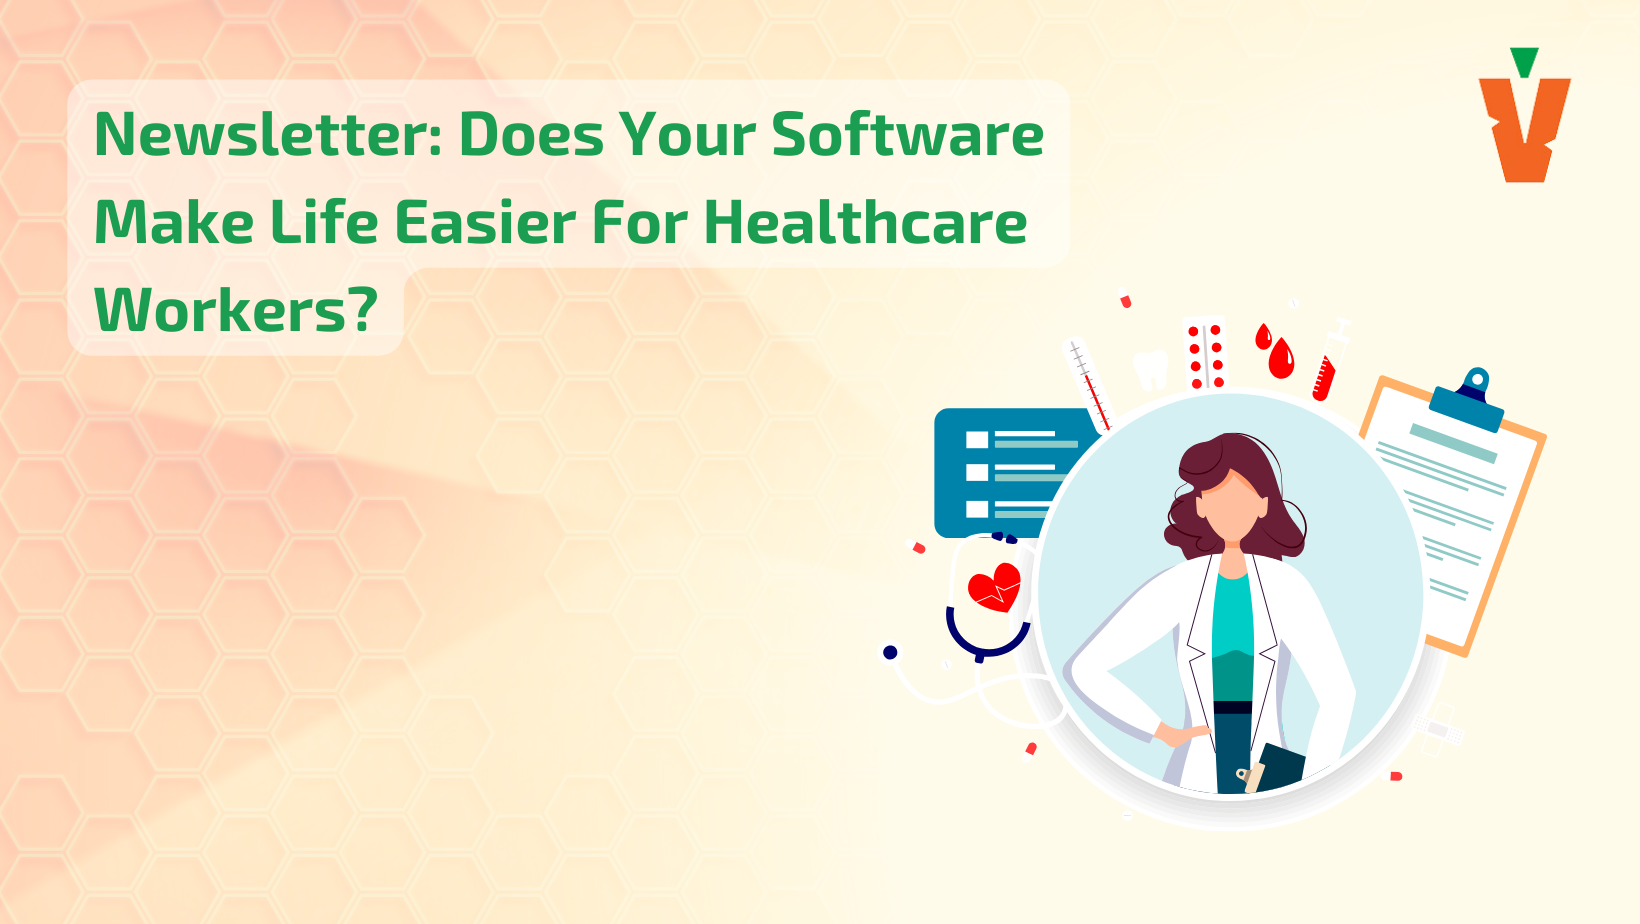 Does Your Software Make Life Easier for Healthcare Workers?